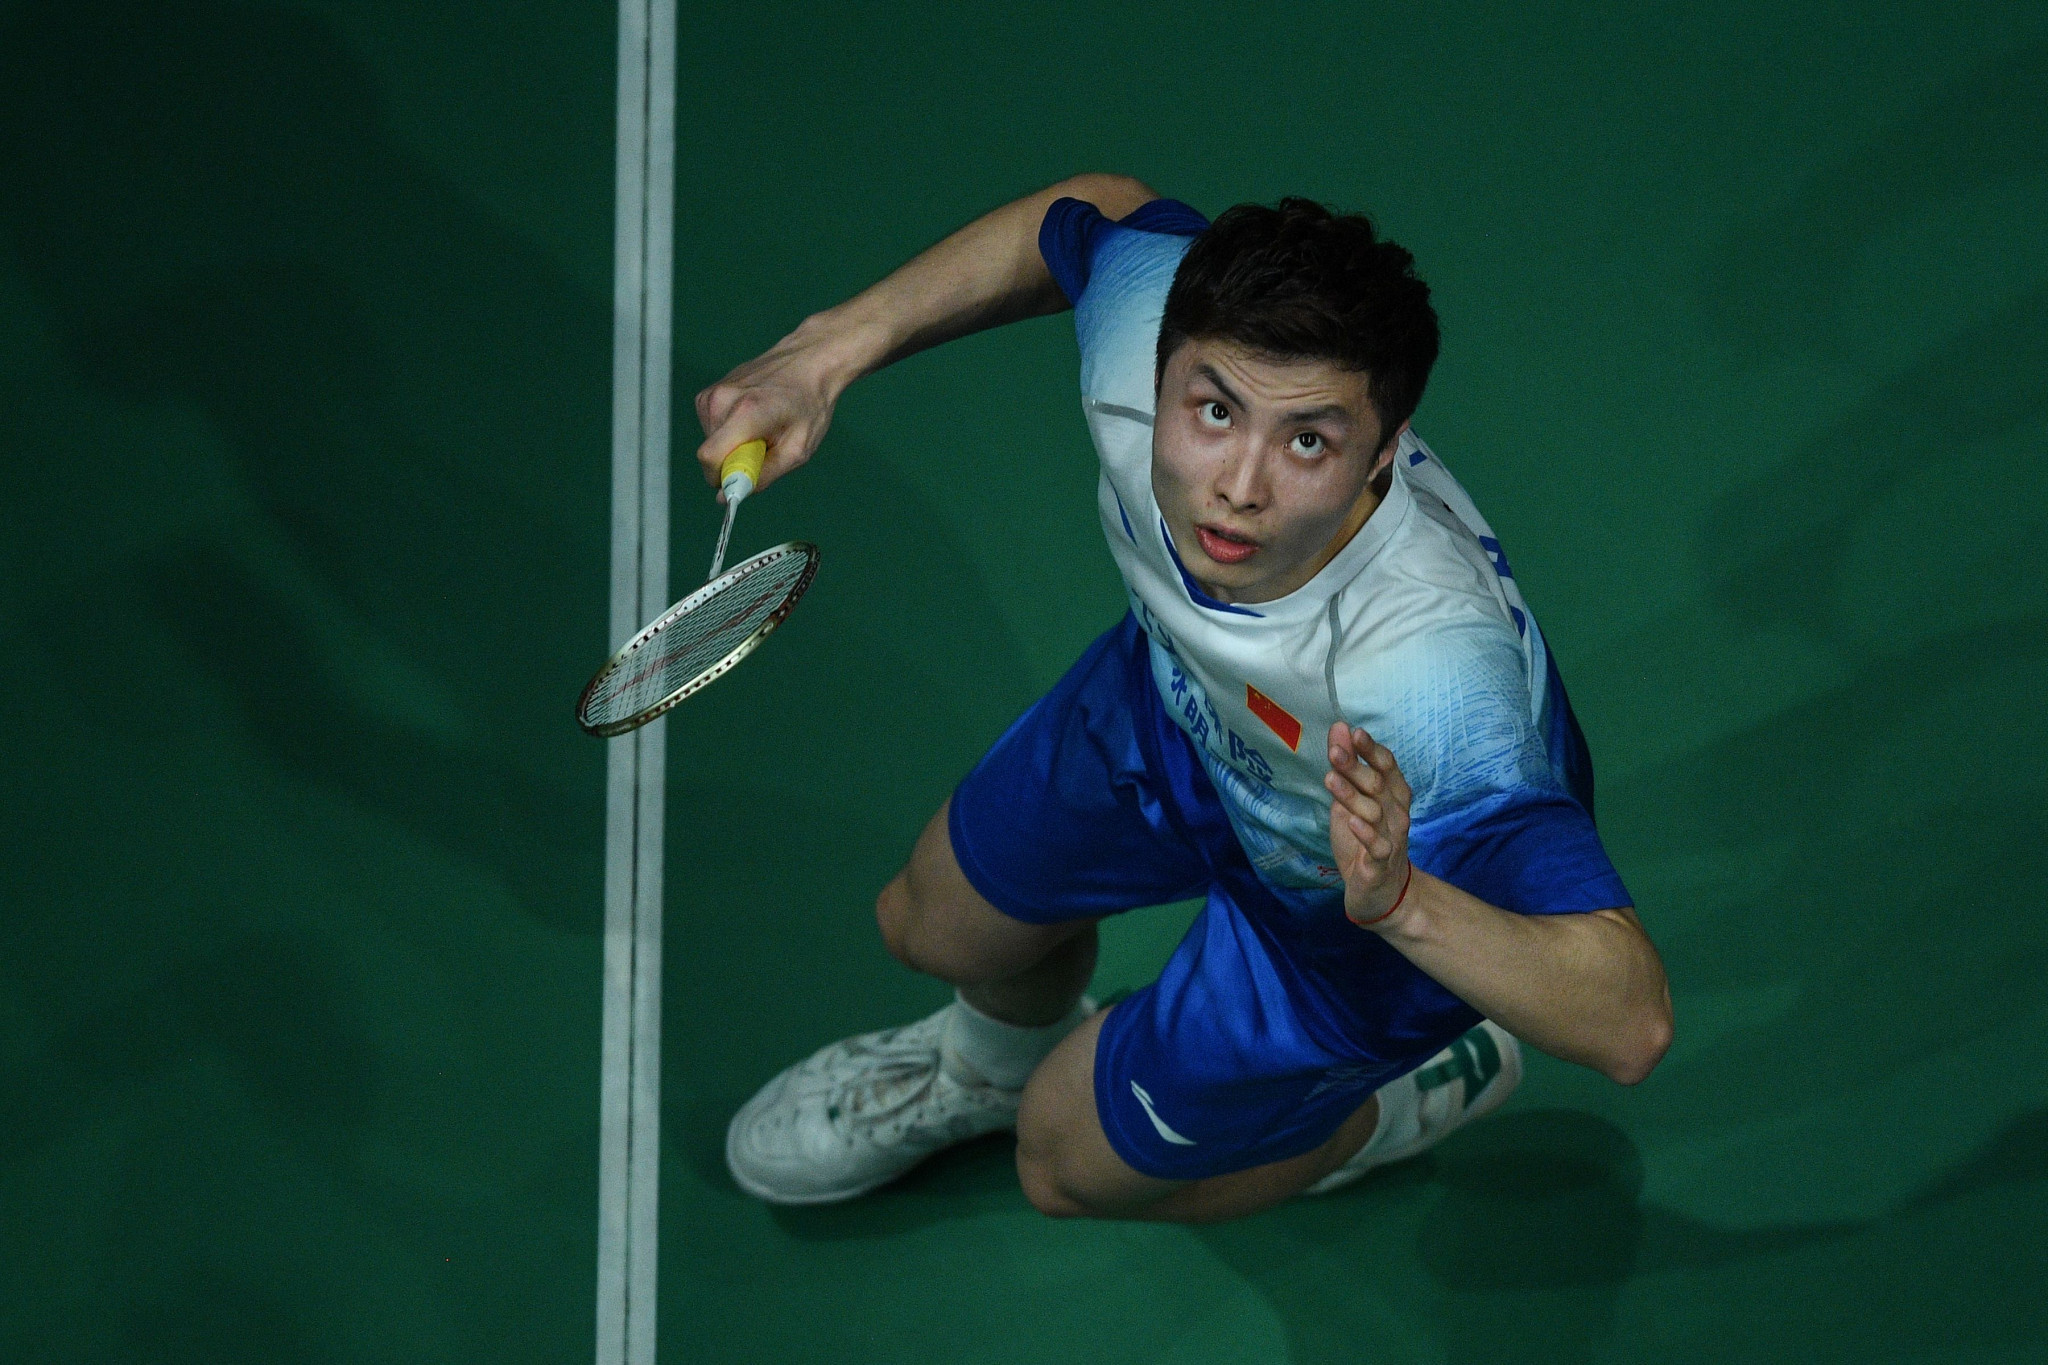 Second seed Shi Yuqi of China remains on course to win the men's singles title ©Getty Images